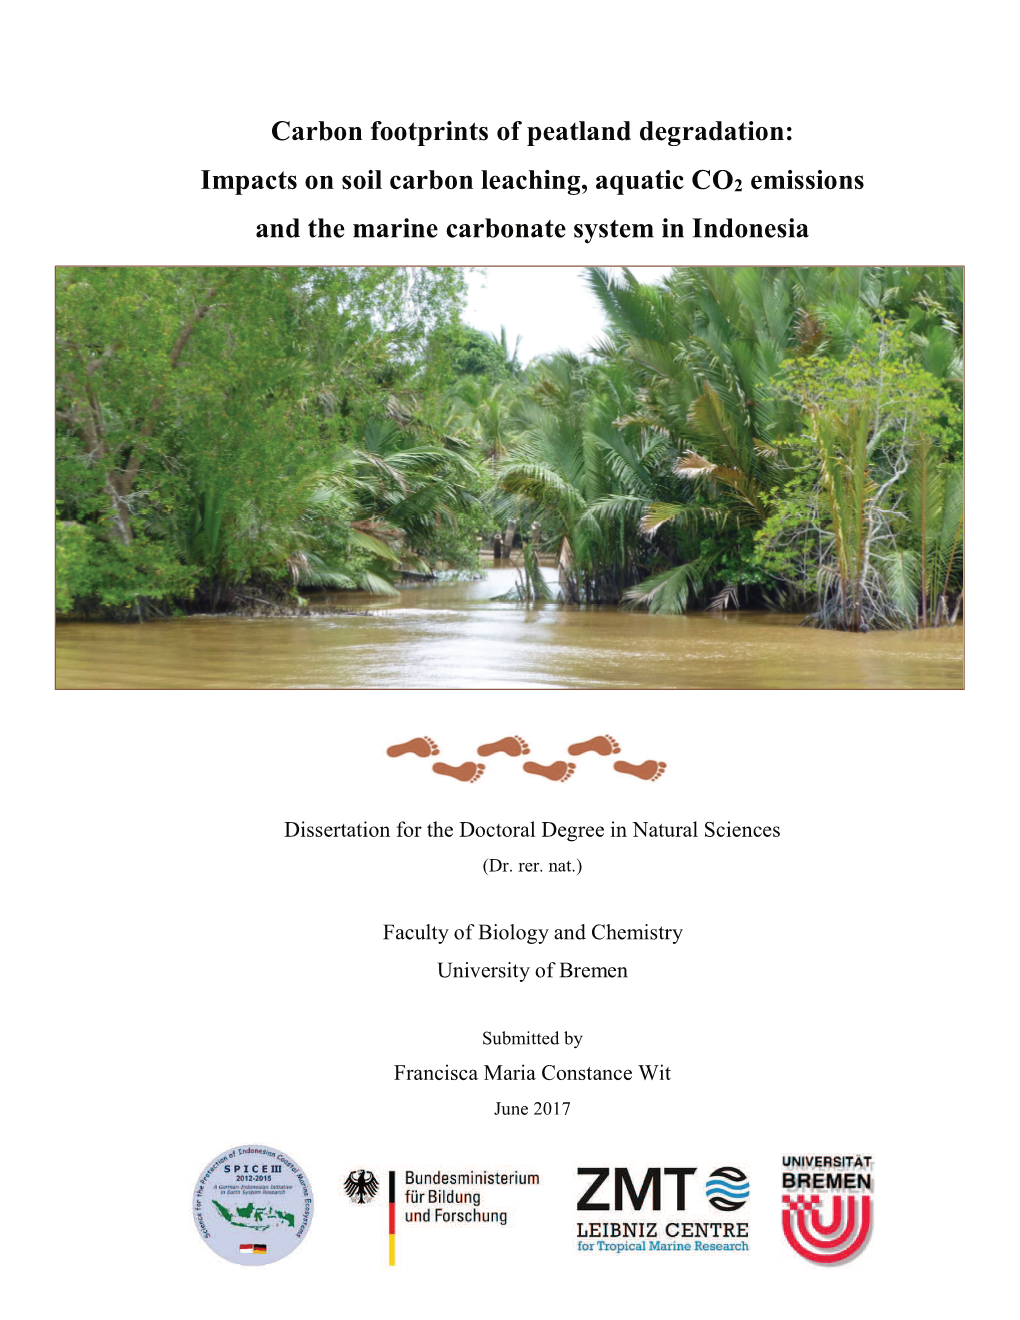 Impacts on Soil Carbon Leaching, Aquatic CO2 Emissions and the Marine Carbonate System in Indonesia